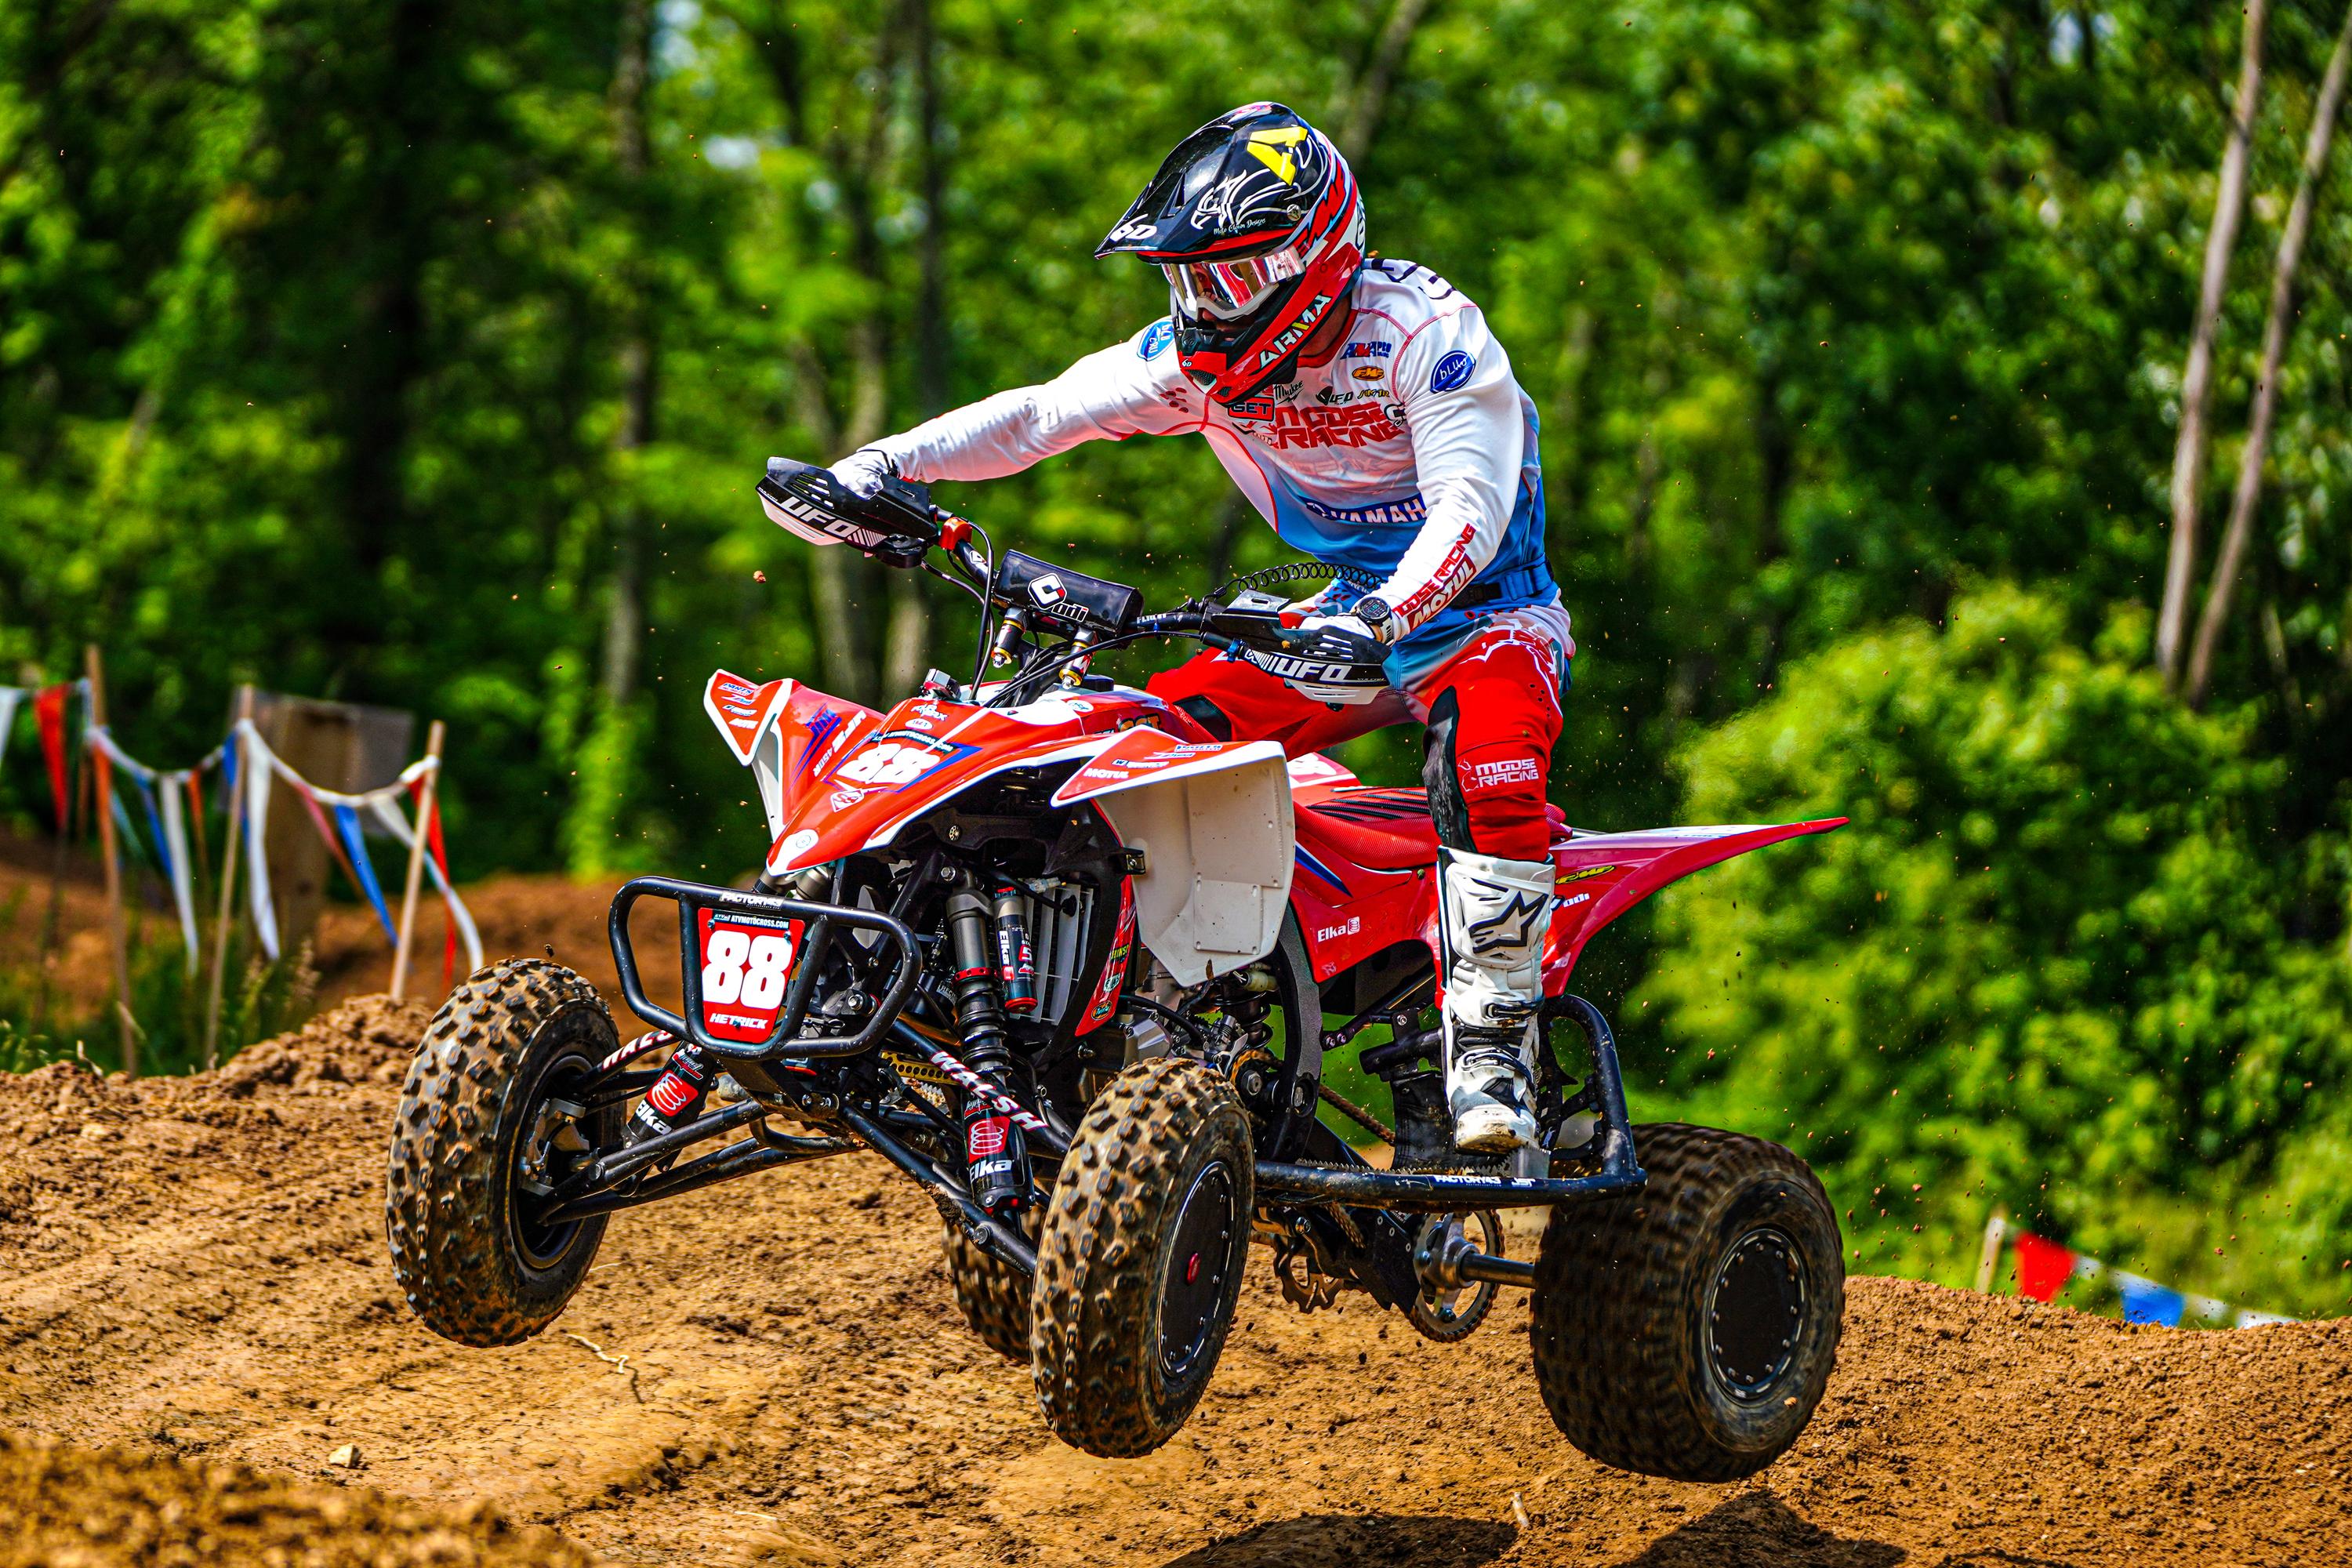 Briarcliff ATVMX National Championship Race Report